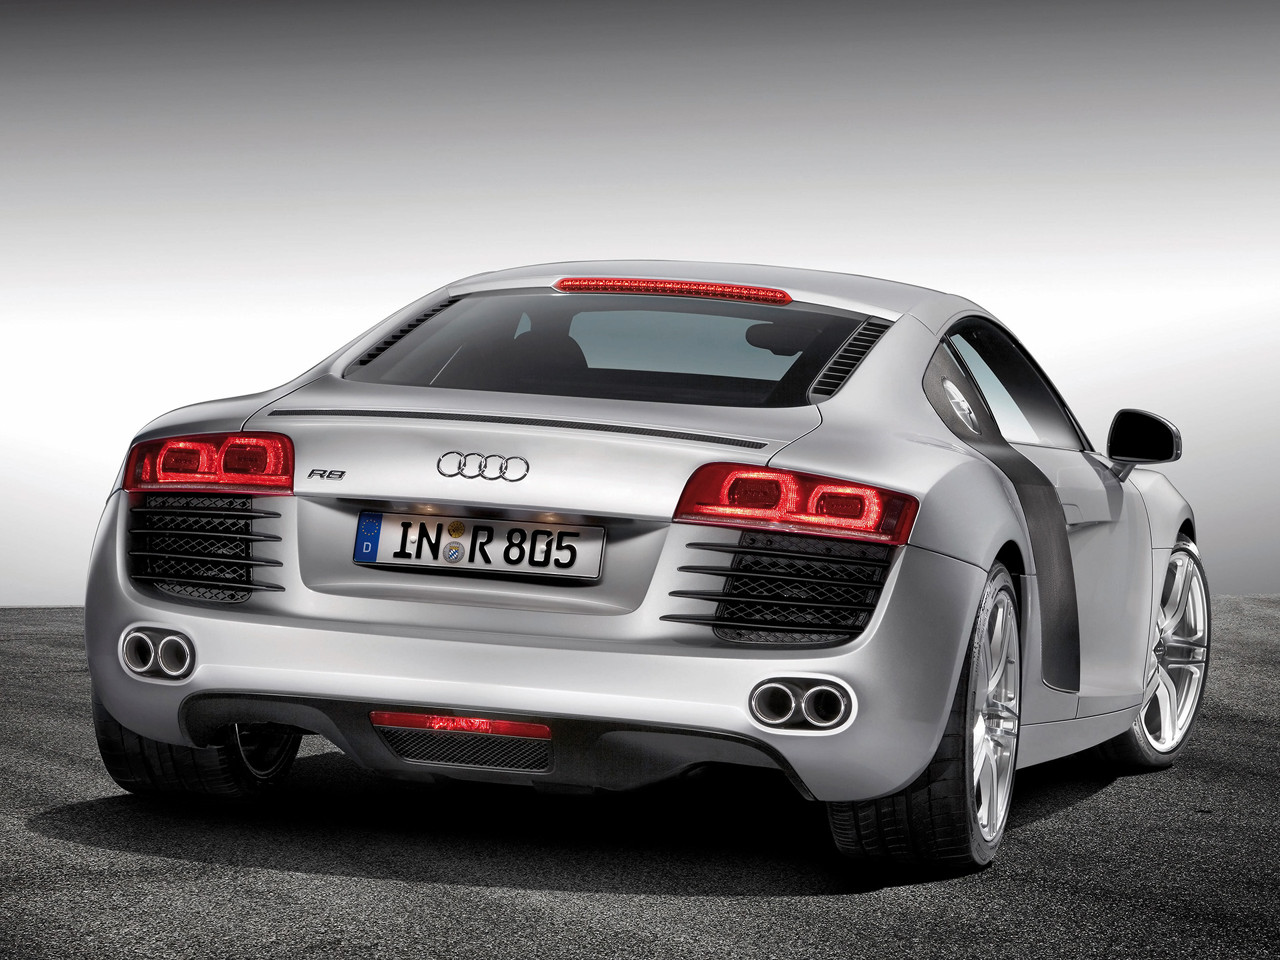 Audi cars wallpapers | Cars Hd Wallpapers